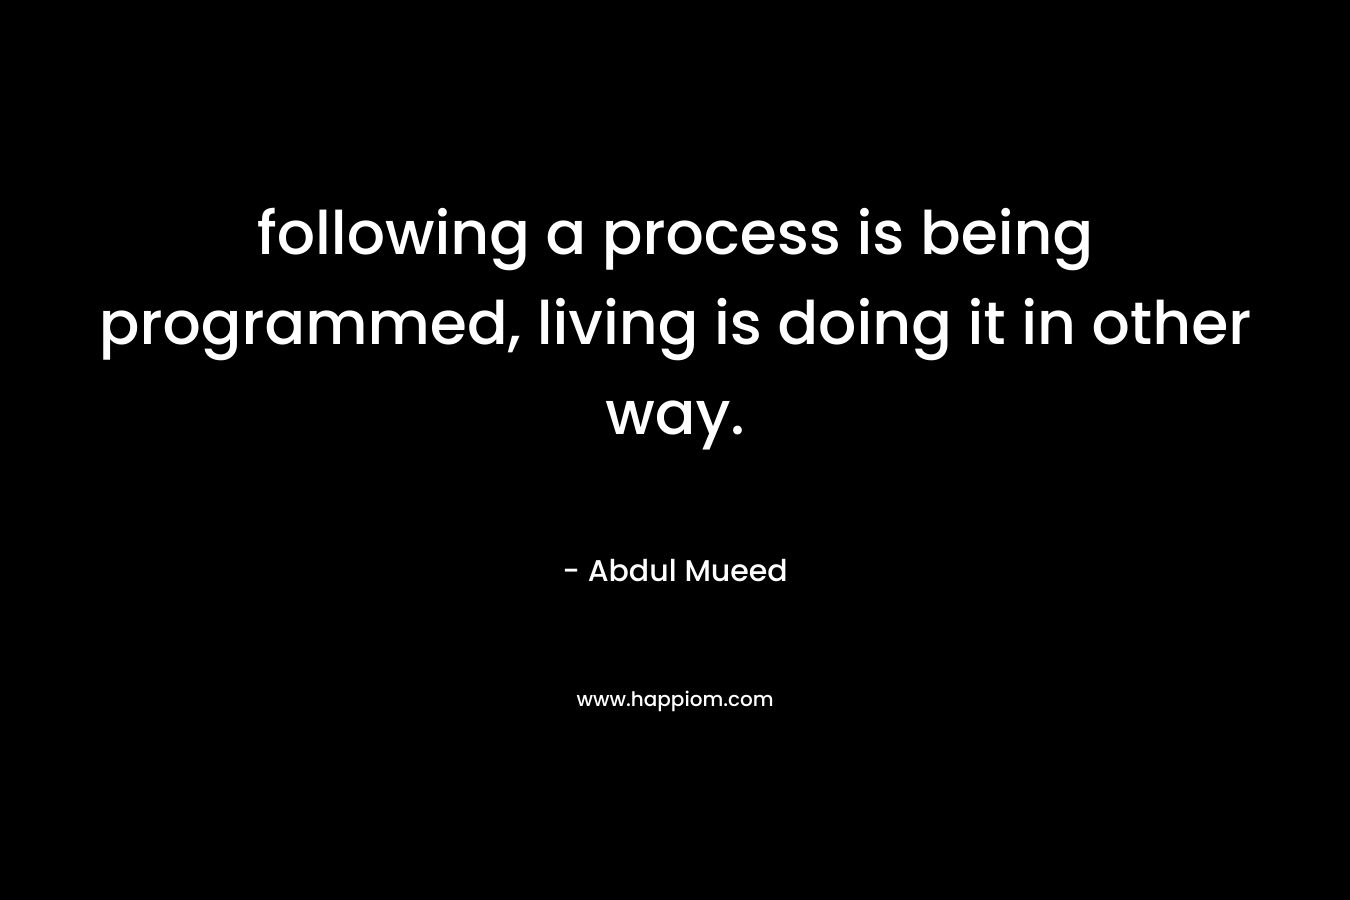 following a process is being programmed, living is doing it in other way.